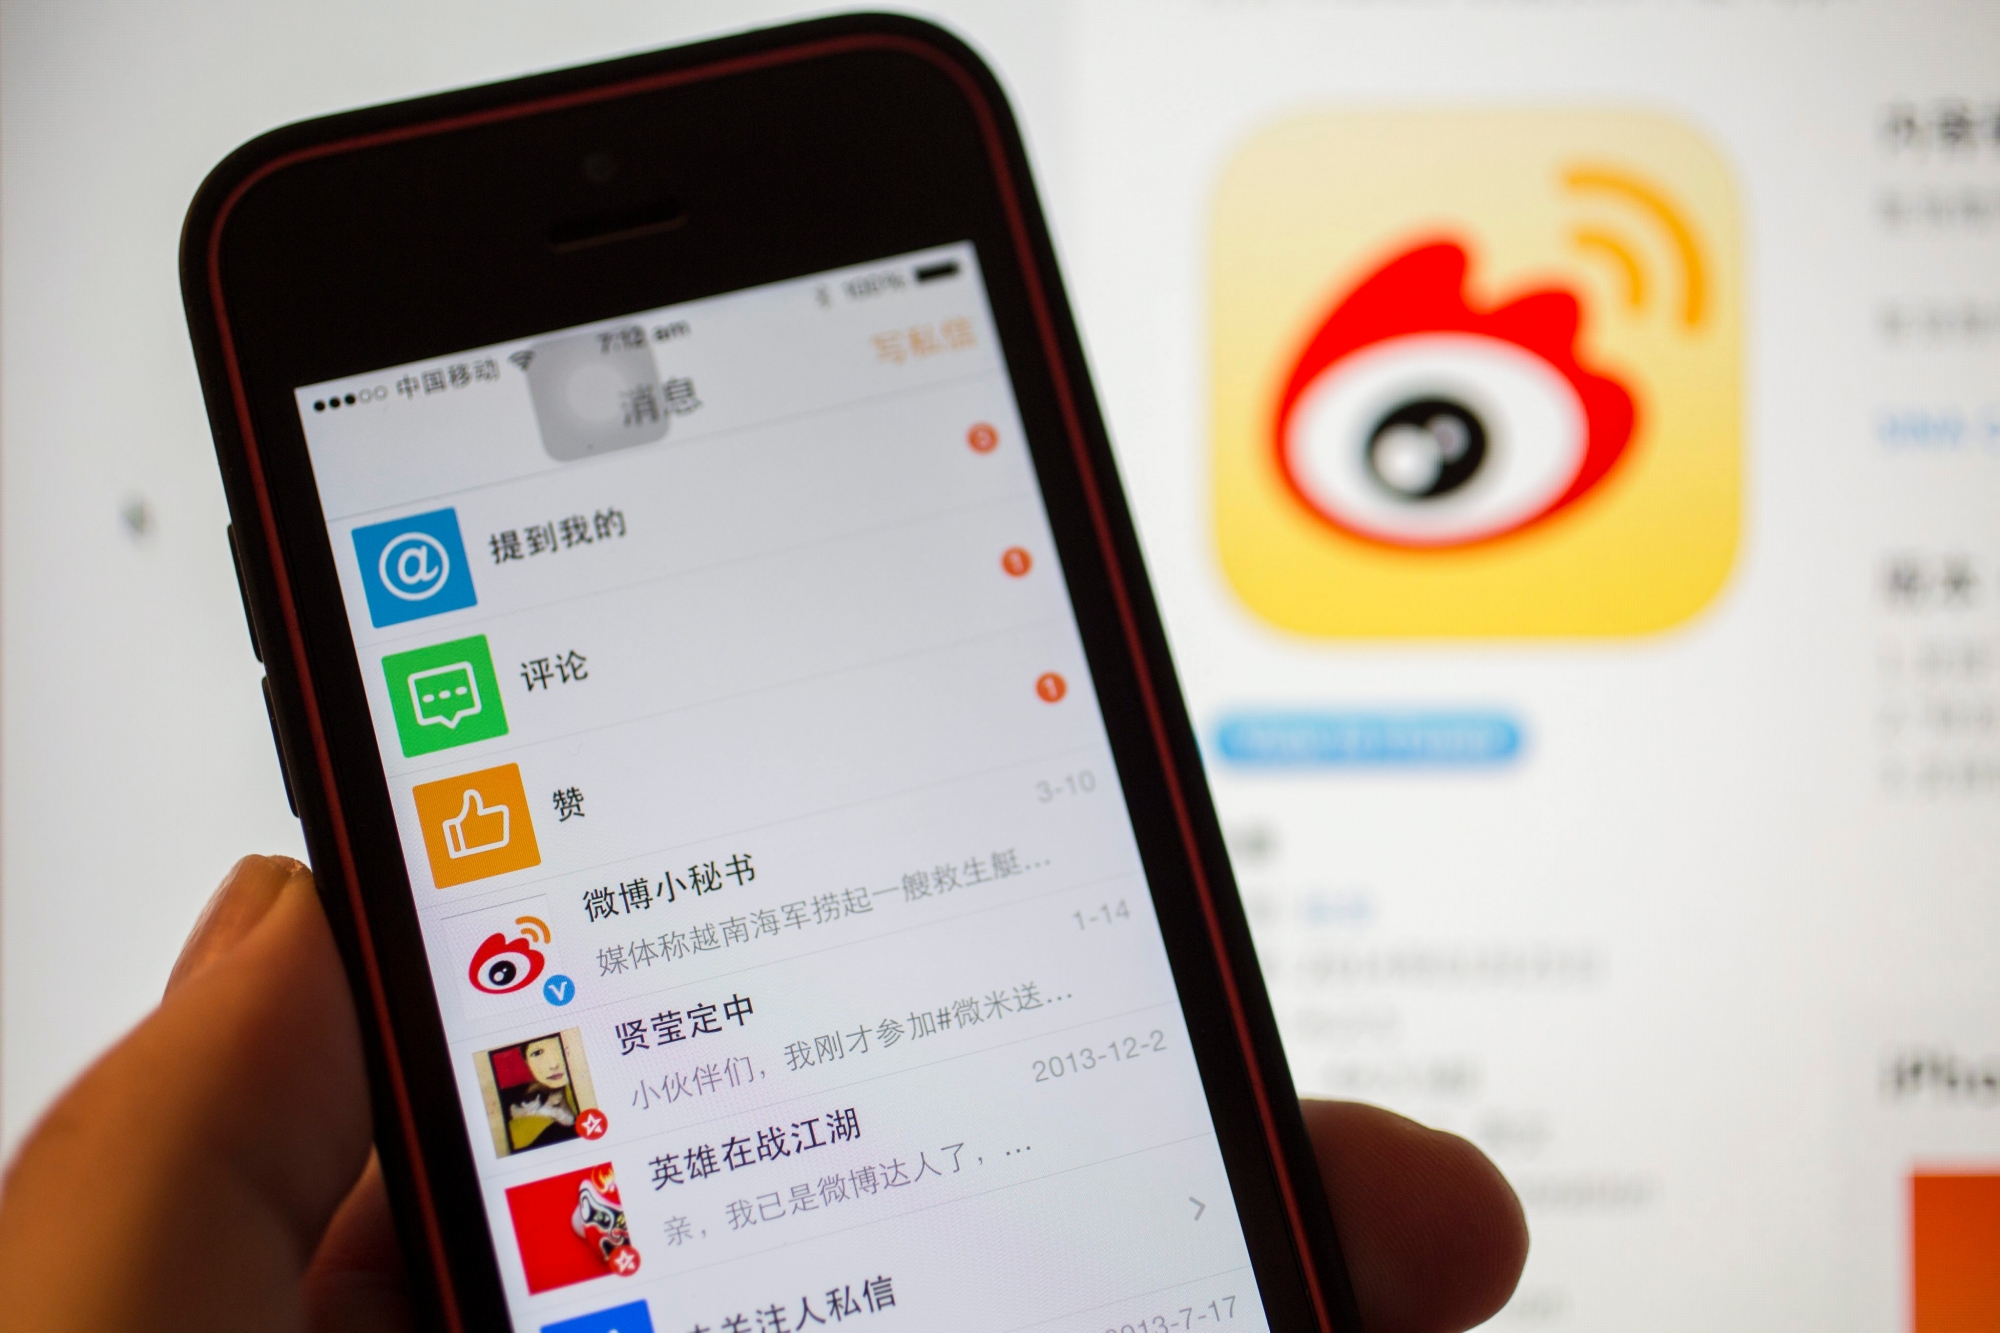 epa04129215 A smartphone running the Sina Weibo social networking app is seen against a background of the company logo on screen in Beijing, China, 17 March 2014. Sina Weibo is one of a number of large Chinese technology companies preparing for initial public offerings (IPO) this year.  EPA/ADRIAN BRADSHAW CHINA SINA WEIBO